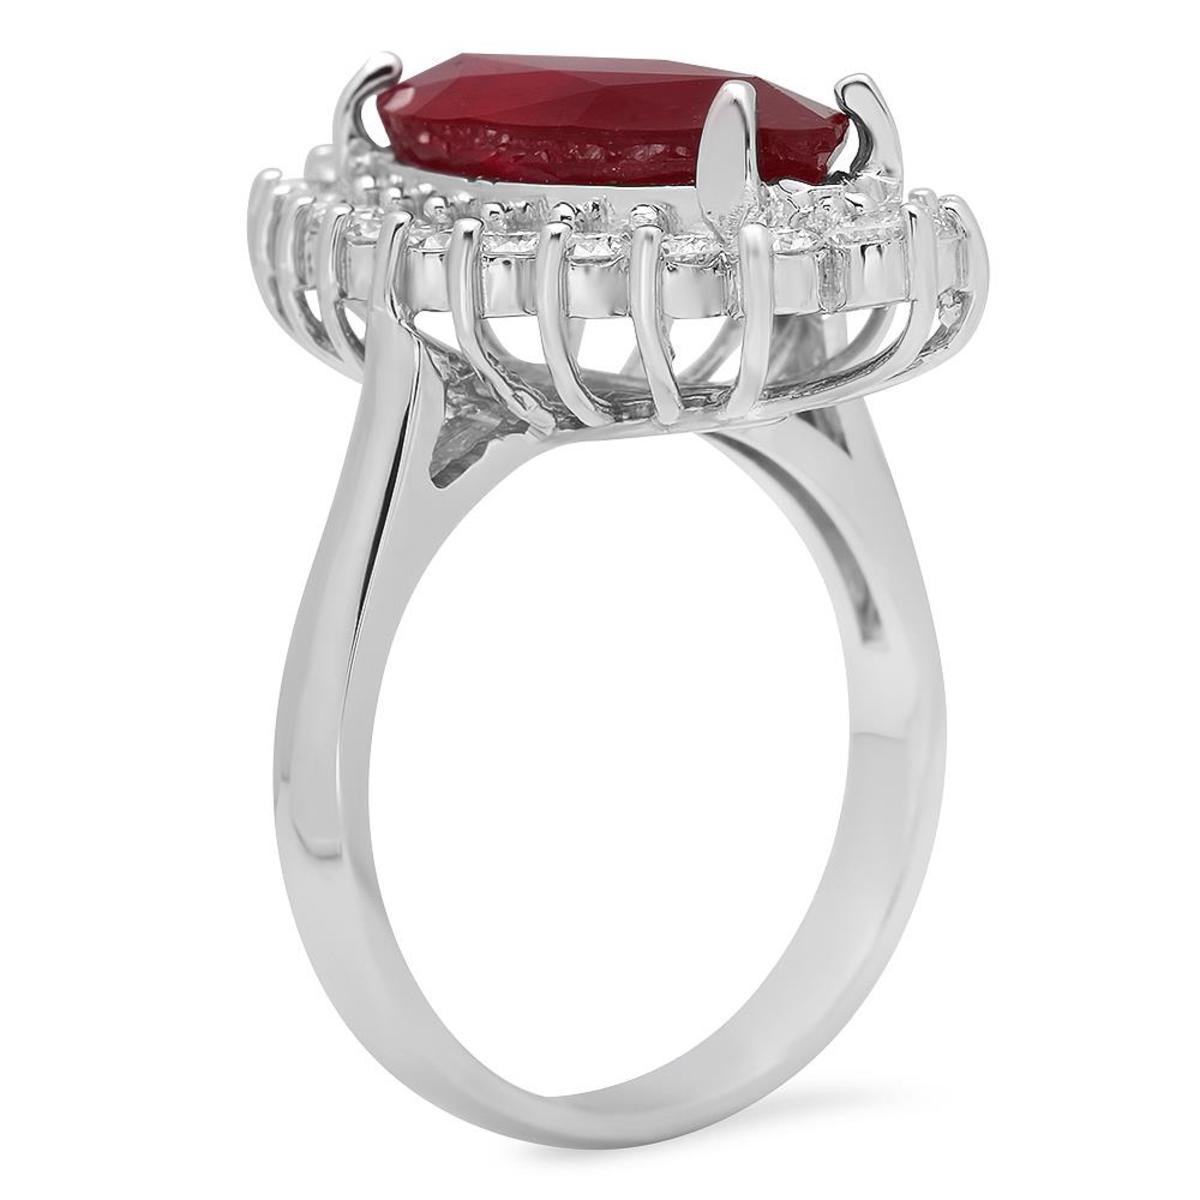 14K White Gold 8.31ct Ruby and 1.47ct Diamond Ring